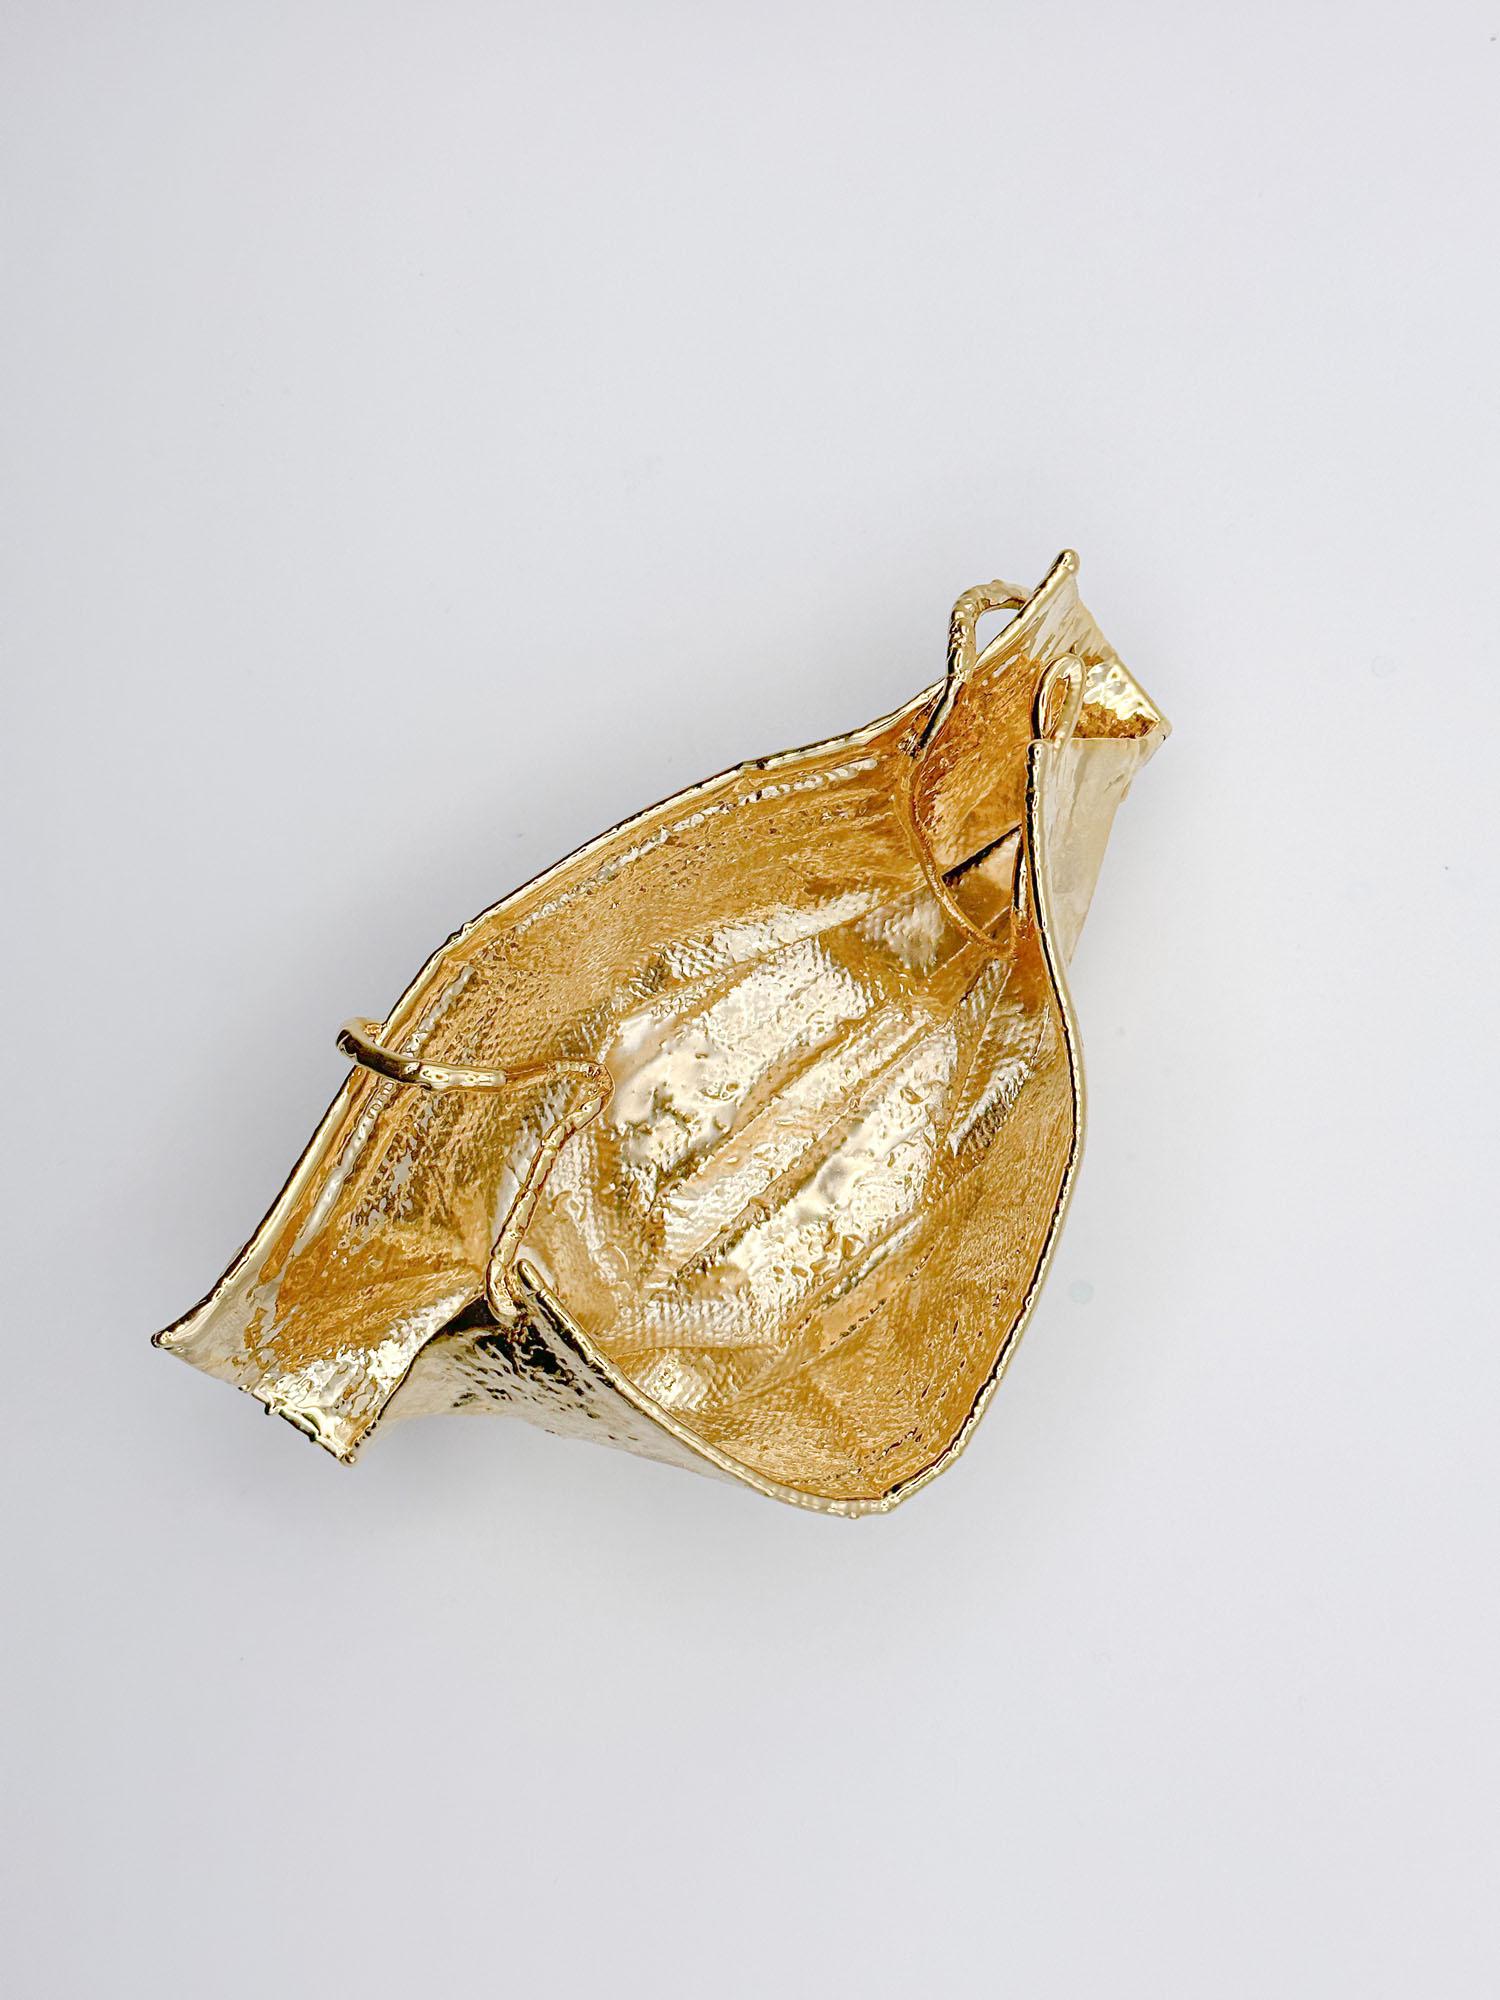 XXIe siècle et contemporain Remask Act 001 Gold Art Objects for Objects for Surgical Mask by Enrico Girotti en vente